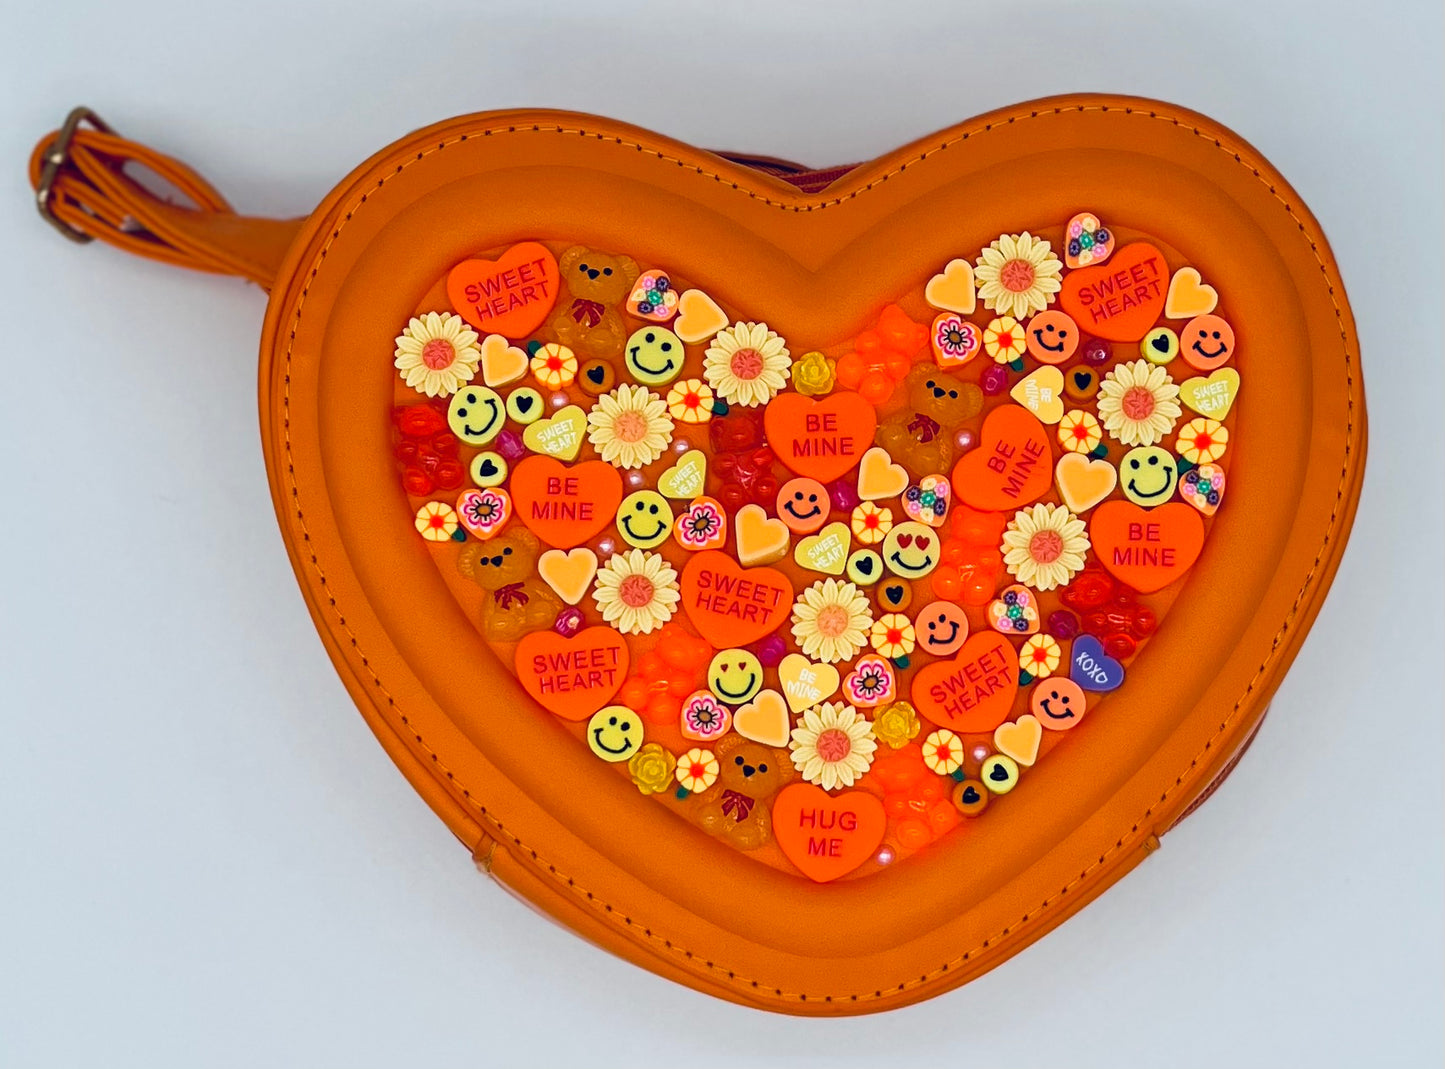 Sweetheart Novelty Purse topped with Absolutely Everything